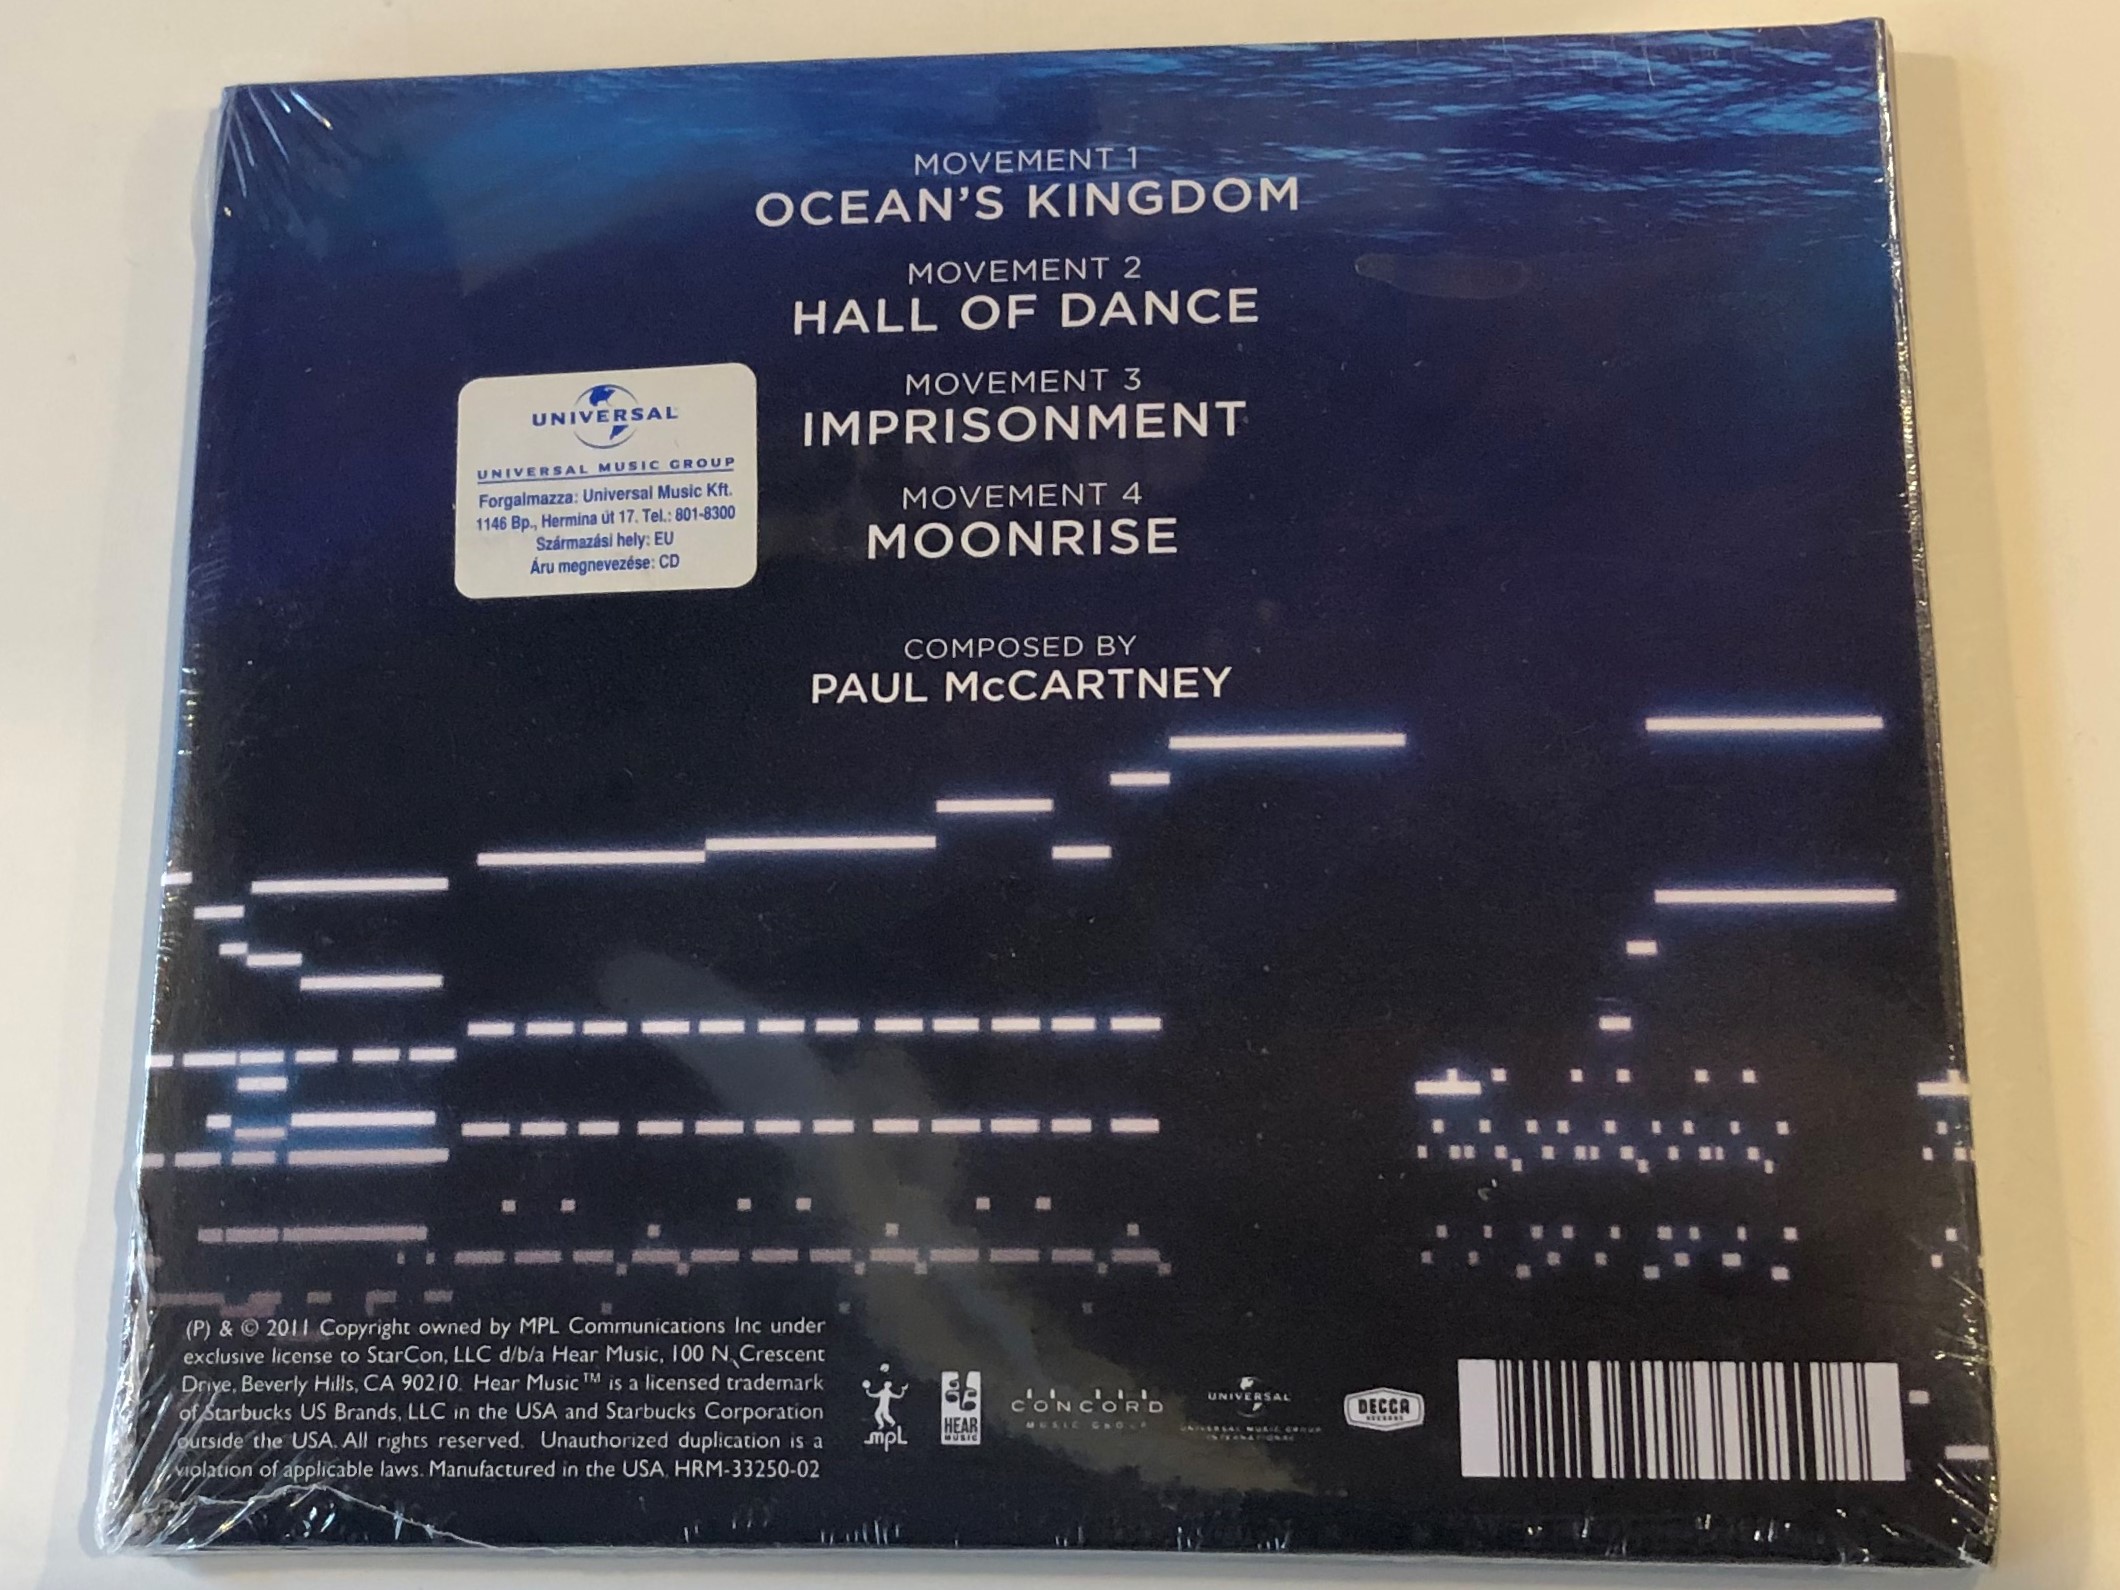 paul-mccartney-s-ocean-s-kingdom-recorded-by-the-london-classical-orchestra-hear-music-audio-cd-2011-hrm-33250-02-2-.jpg